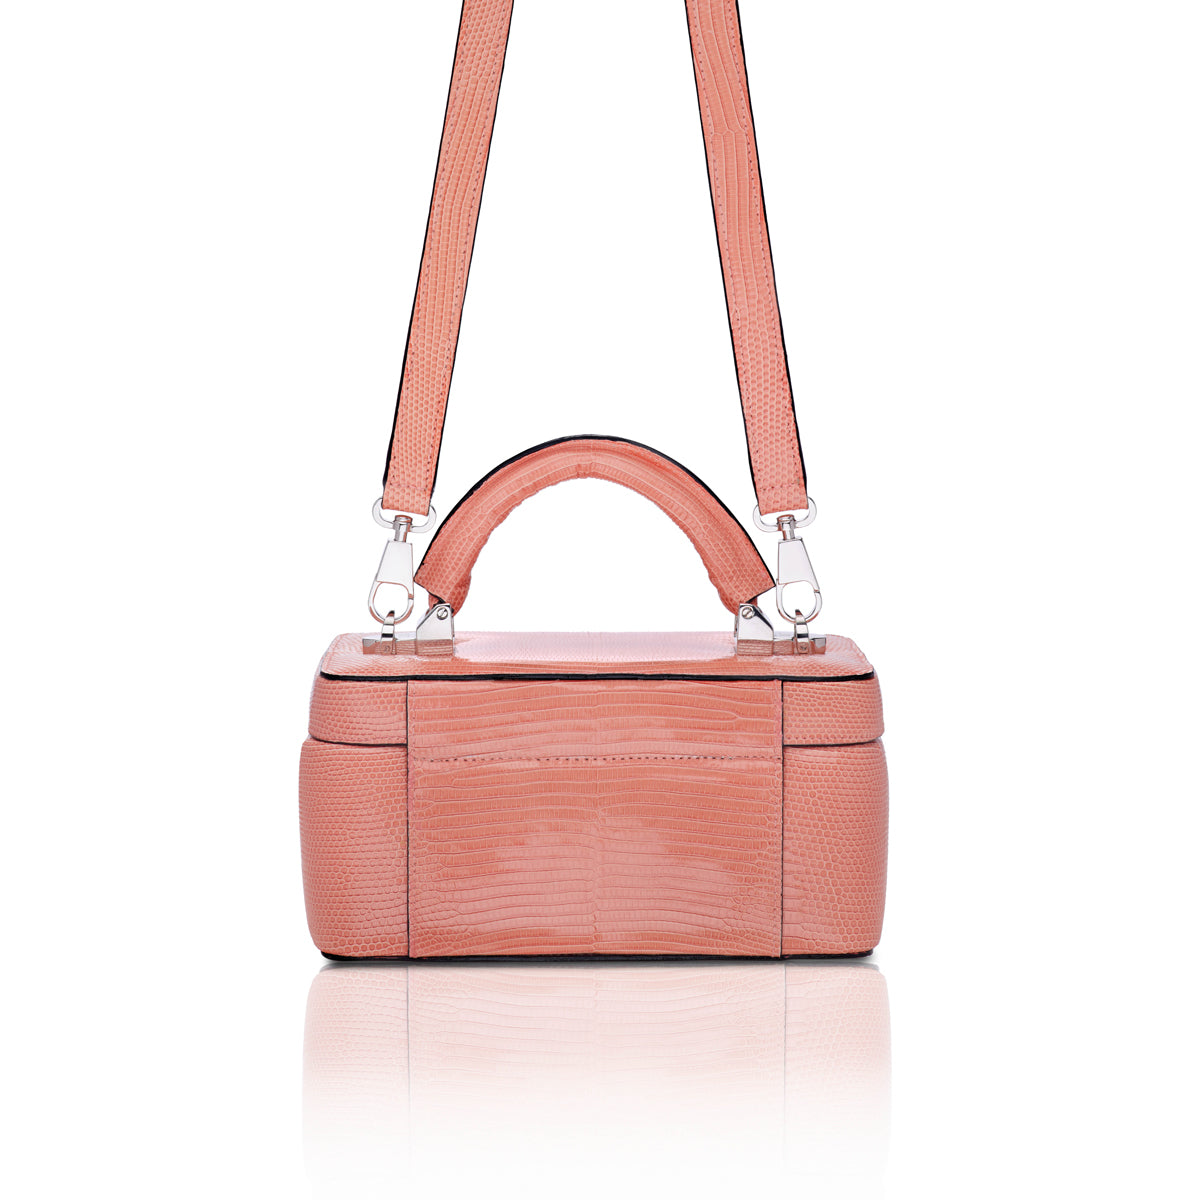 STALVEY Beauty Case in Coral Lizard Back View